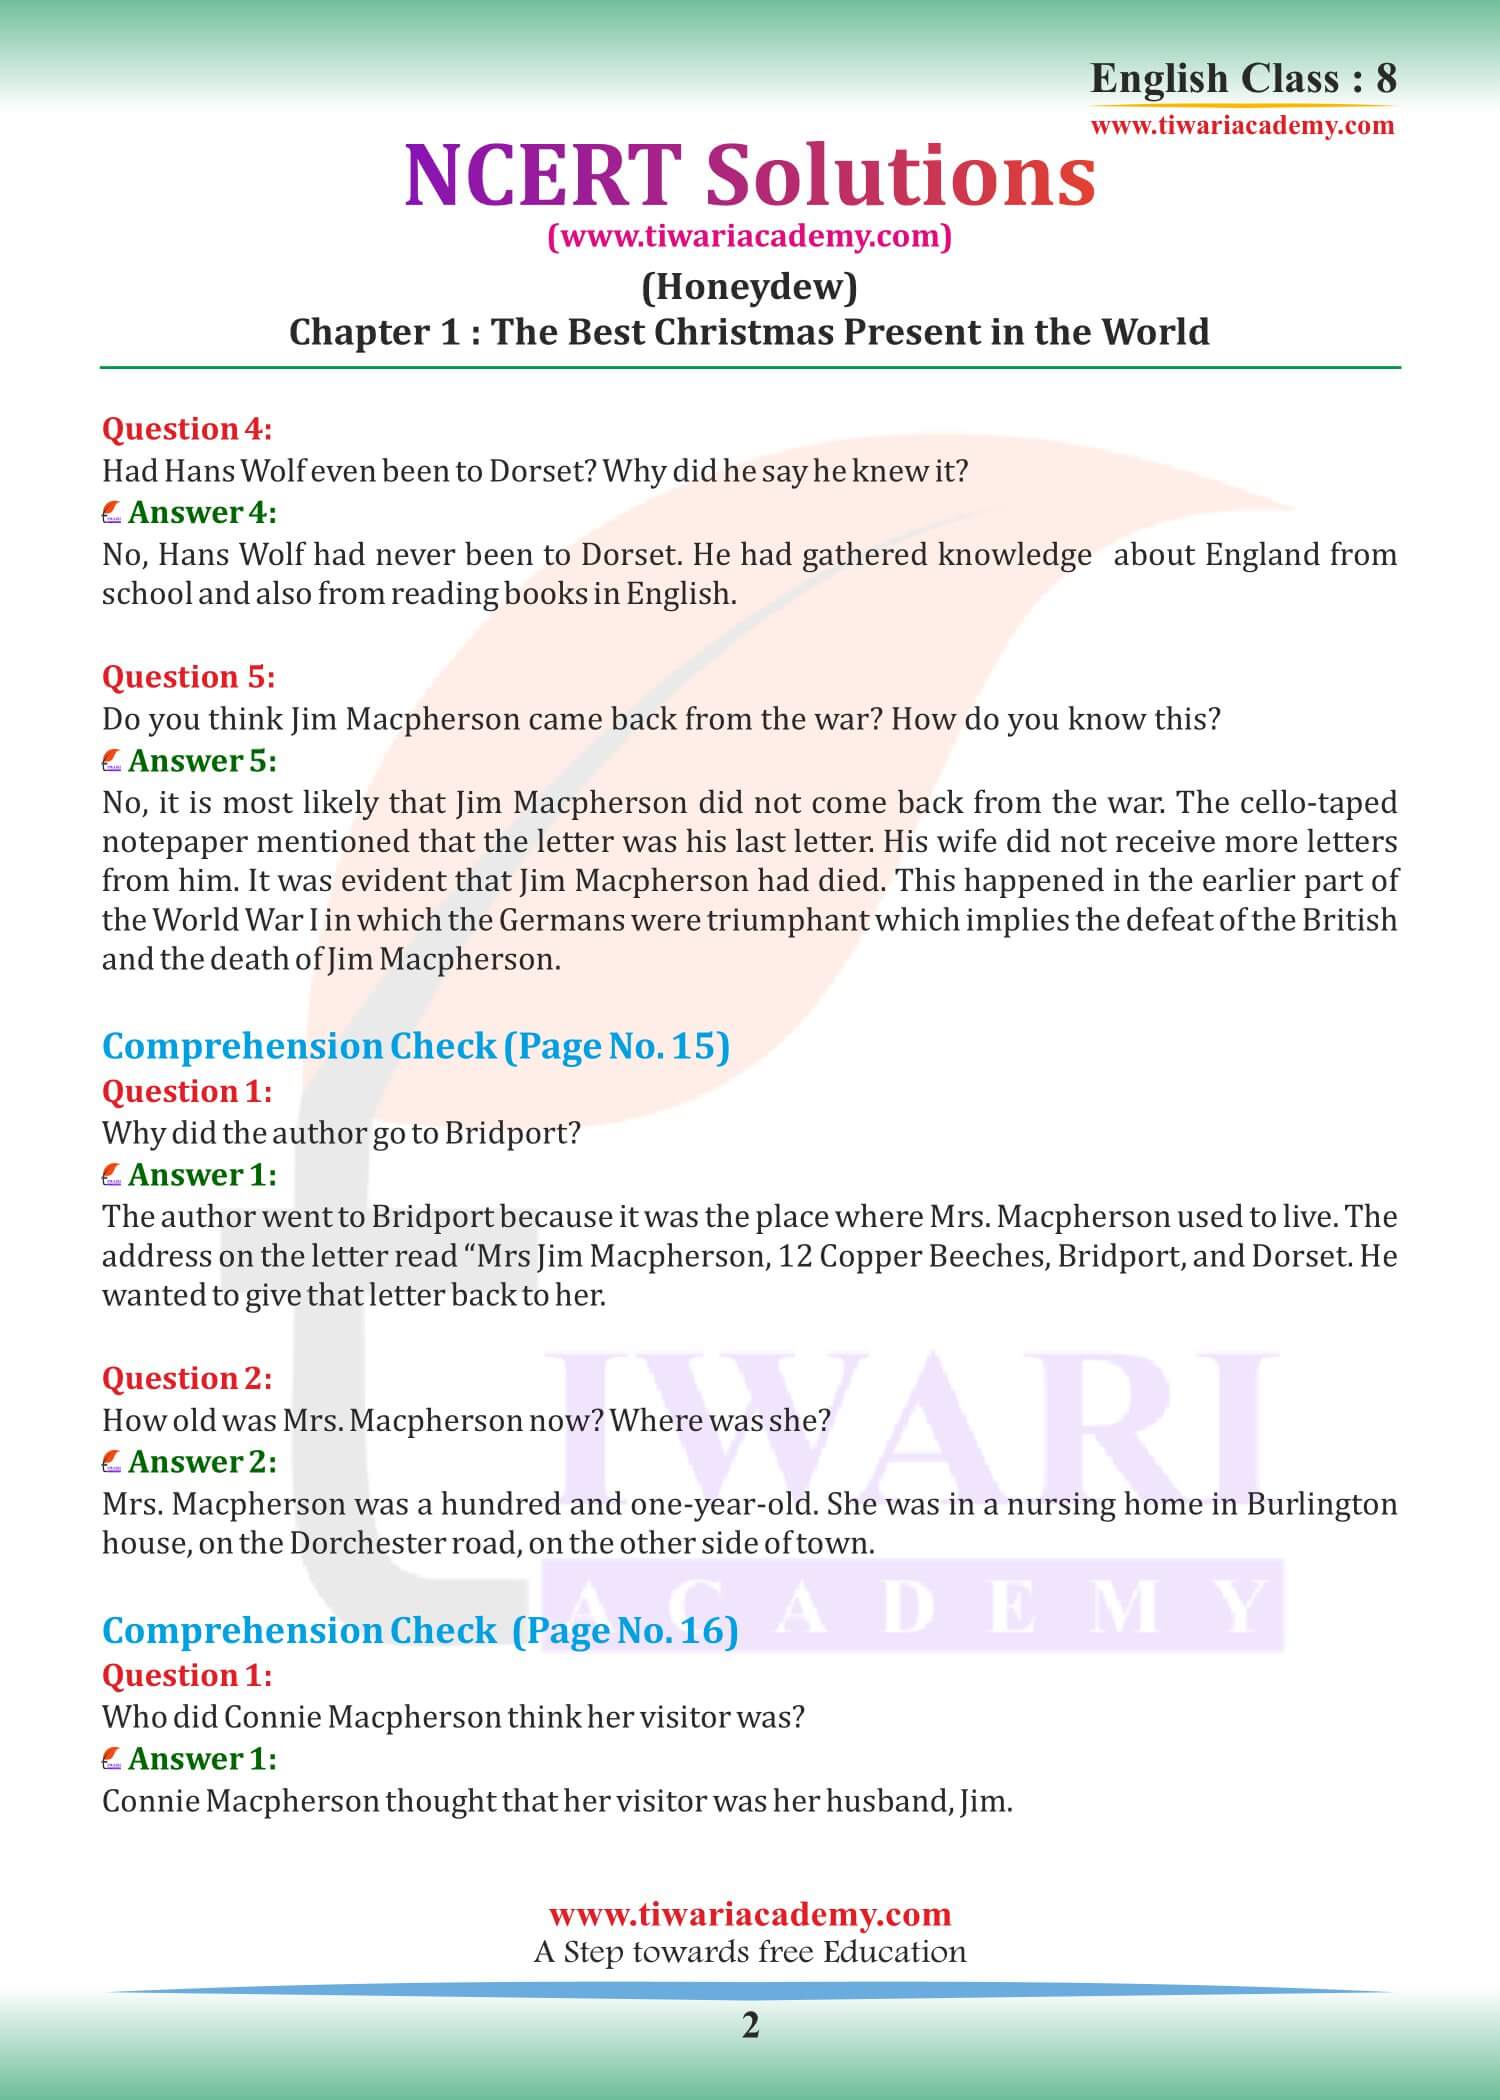 Class 8 English Honeydew Chapter 1 The Best Christmas Present in the World